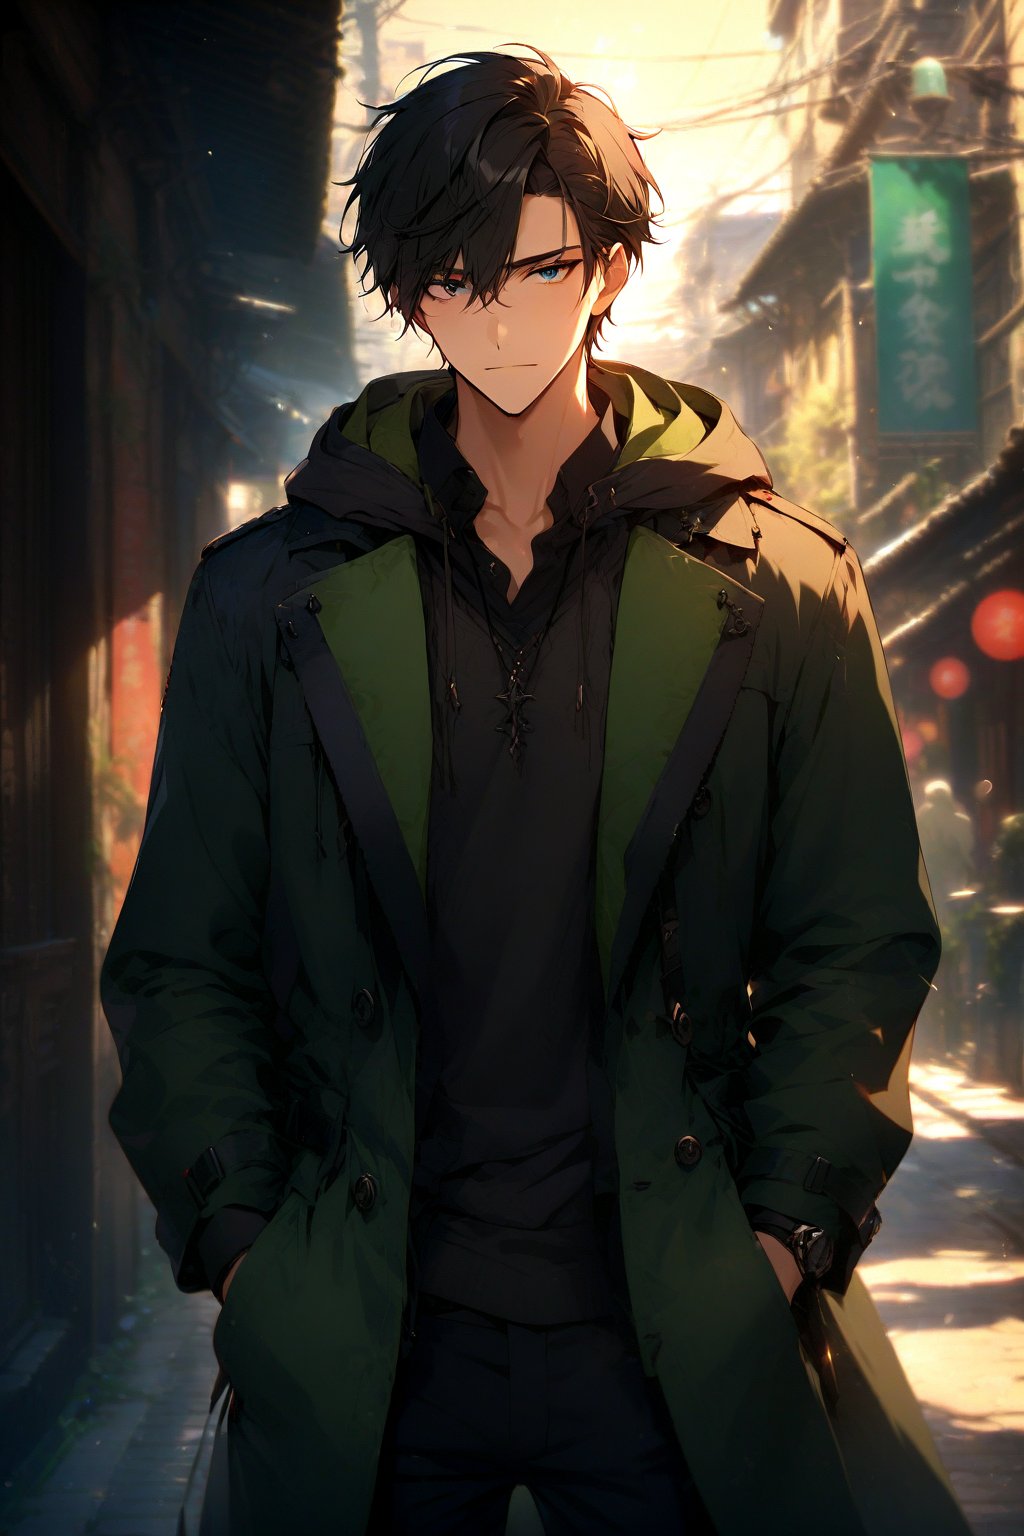 Urban style. Male. Tall and handsome, cold and arrogant temperament, firm eyes. Black hair